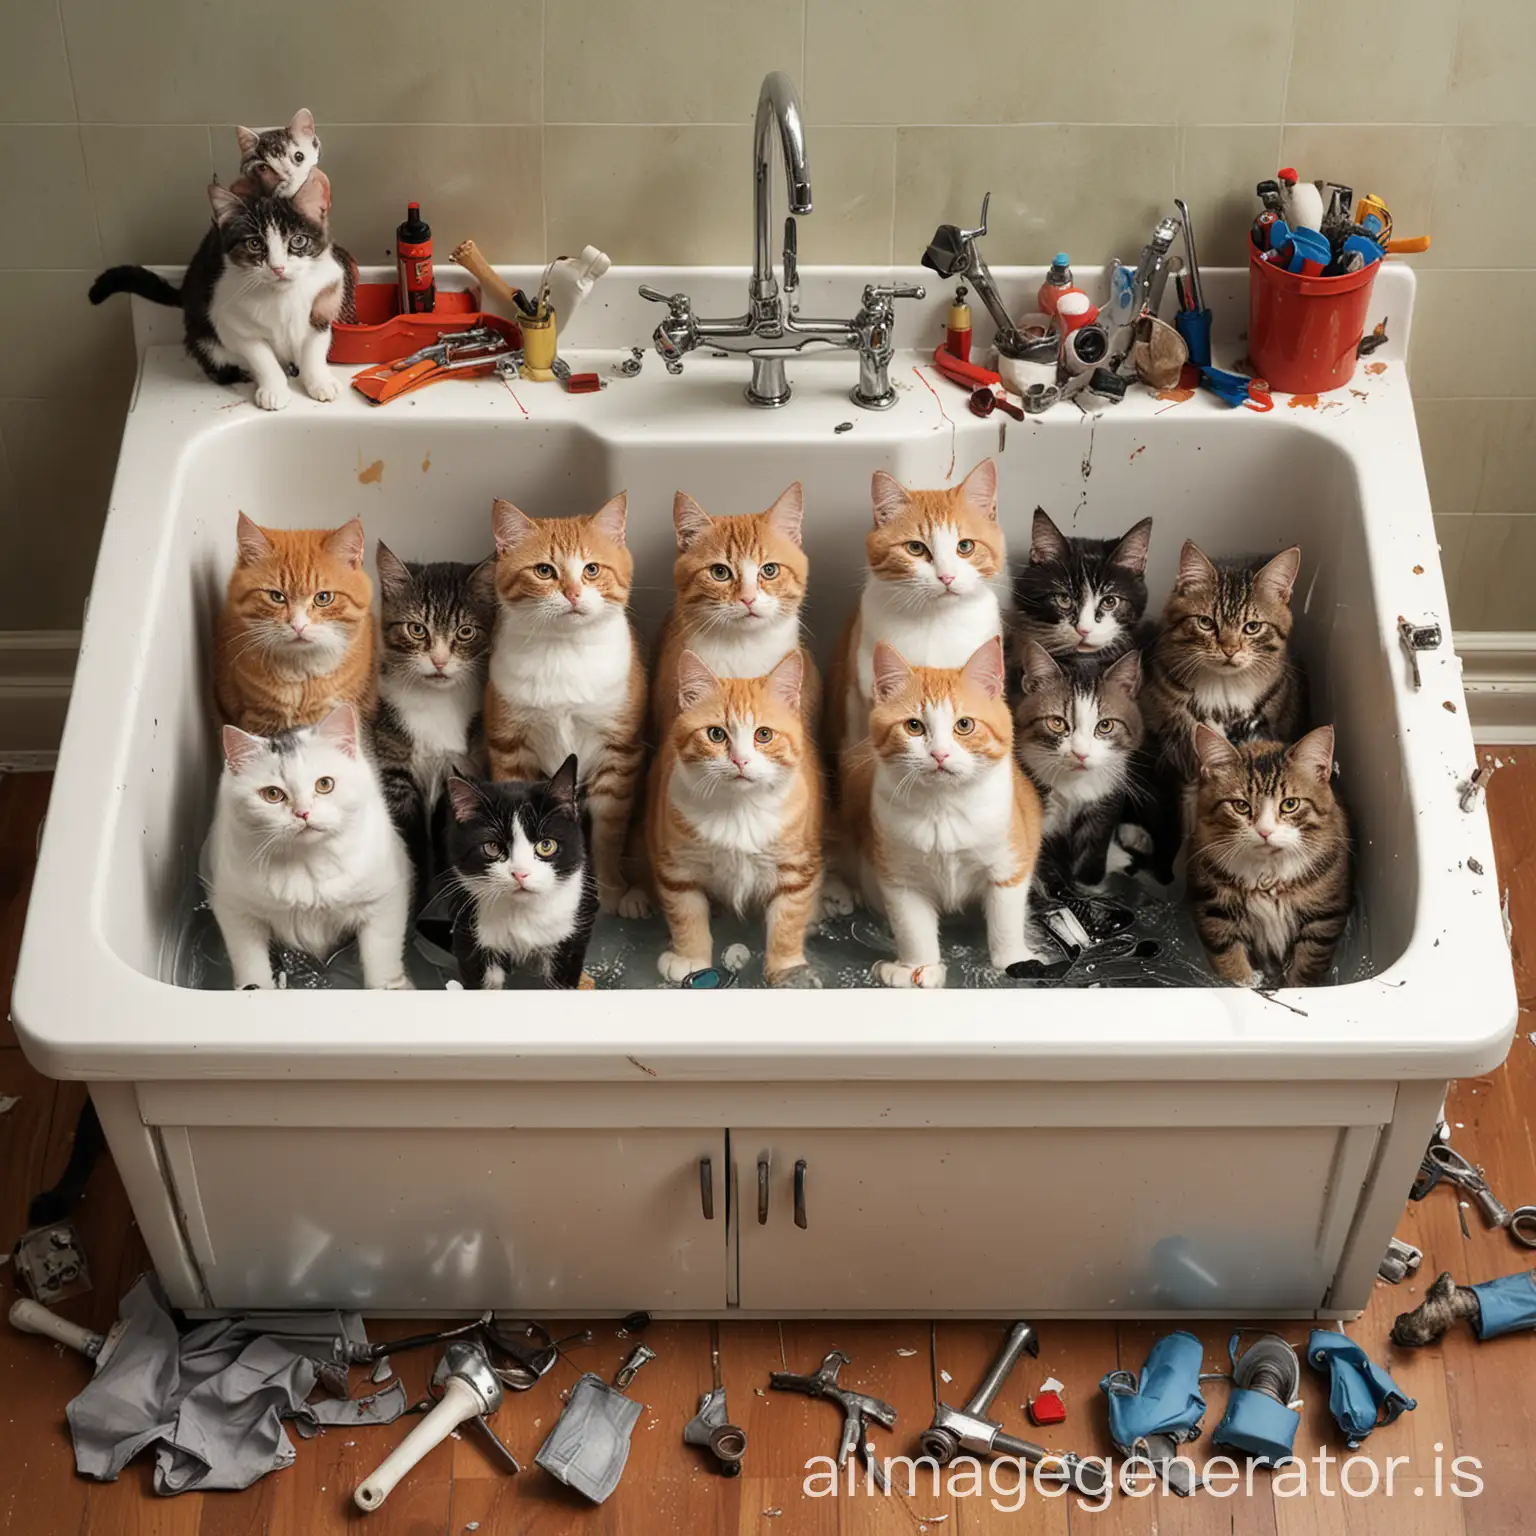 A BROKEN SINK WITH DOZENS OF CATS DRESSED AS MECHANICS AROUND AND UNDER THE SINK WITH TOOLS IN THEIR HANDS